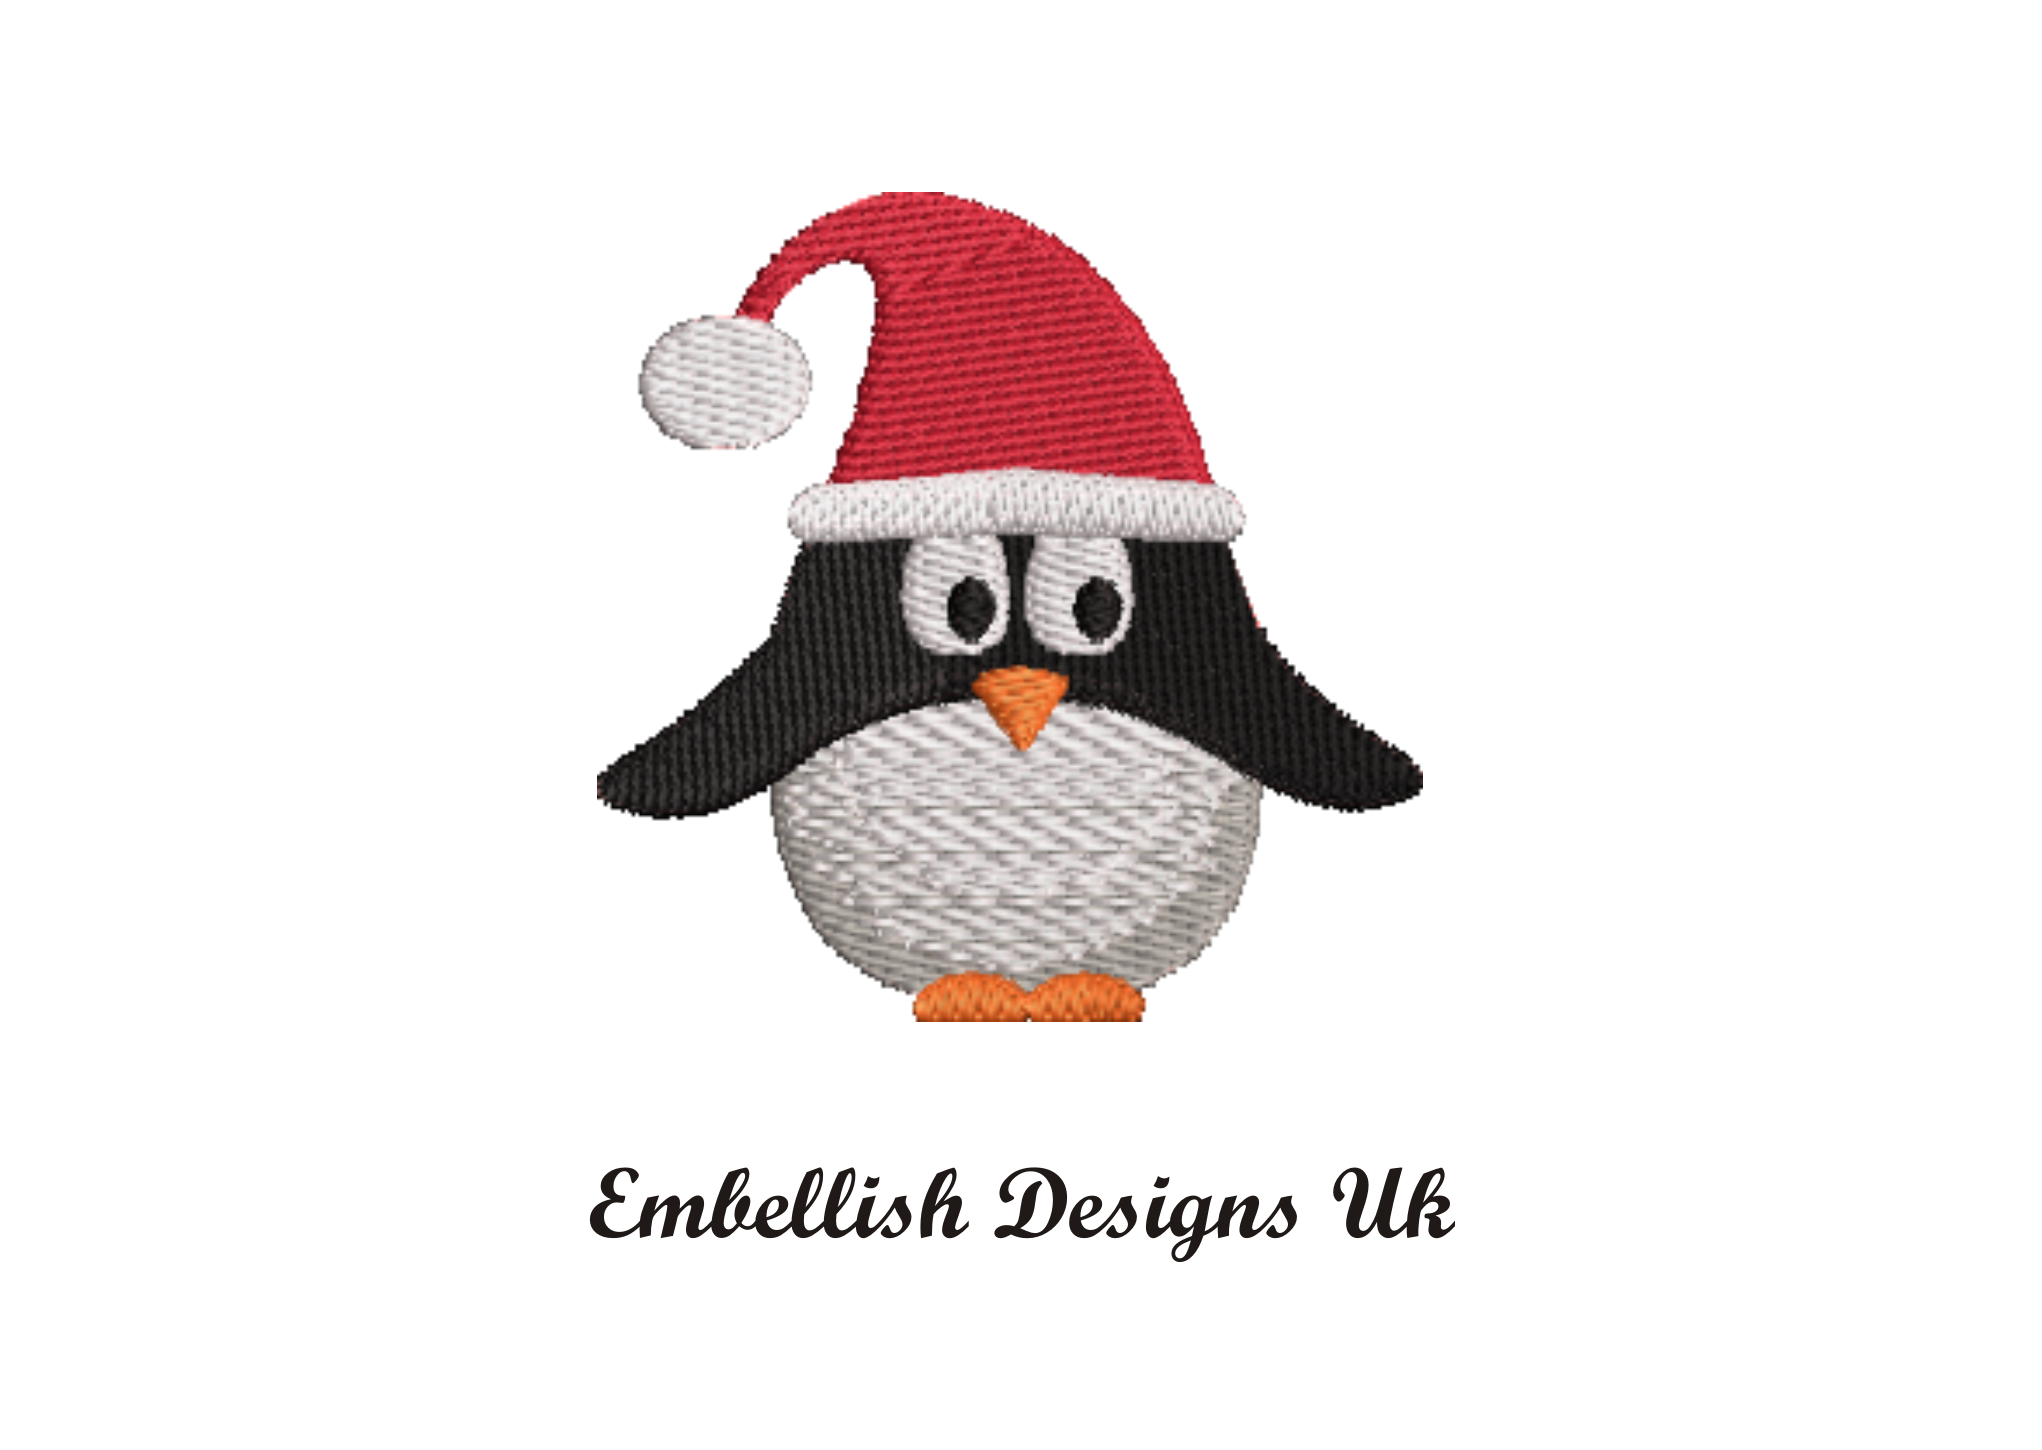 Penguin In Santa Hat Machine Embroidery Design By Embellish Designs Uk Thehungryjpeg Com,Interior Design Competitions 2020